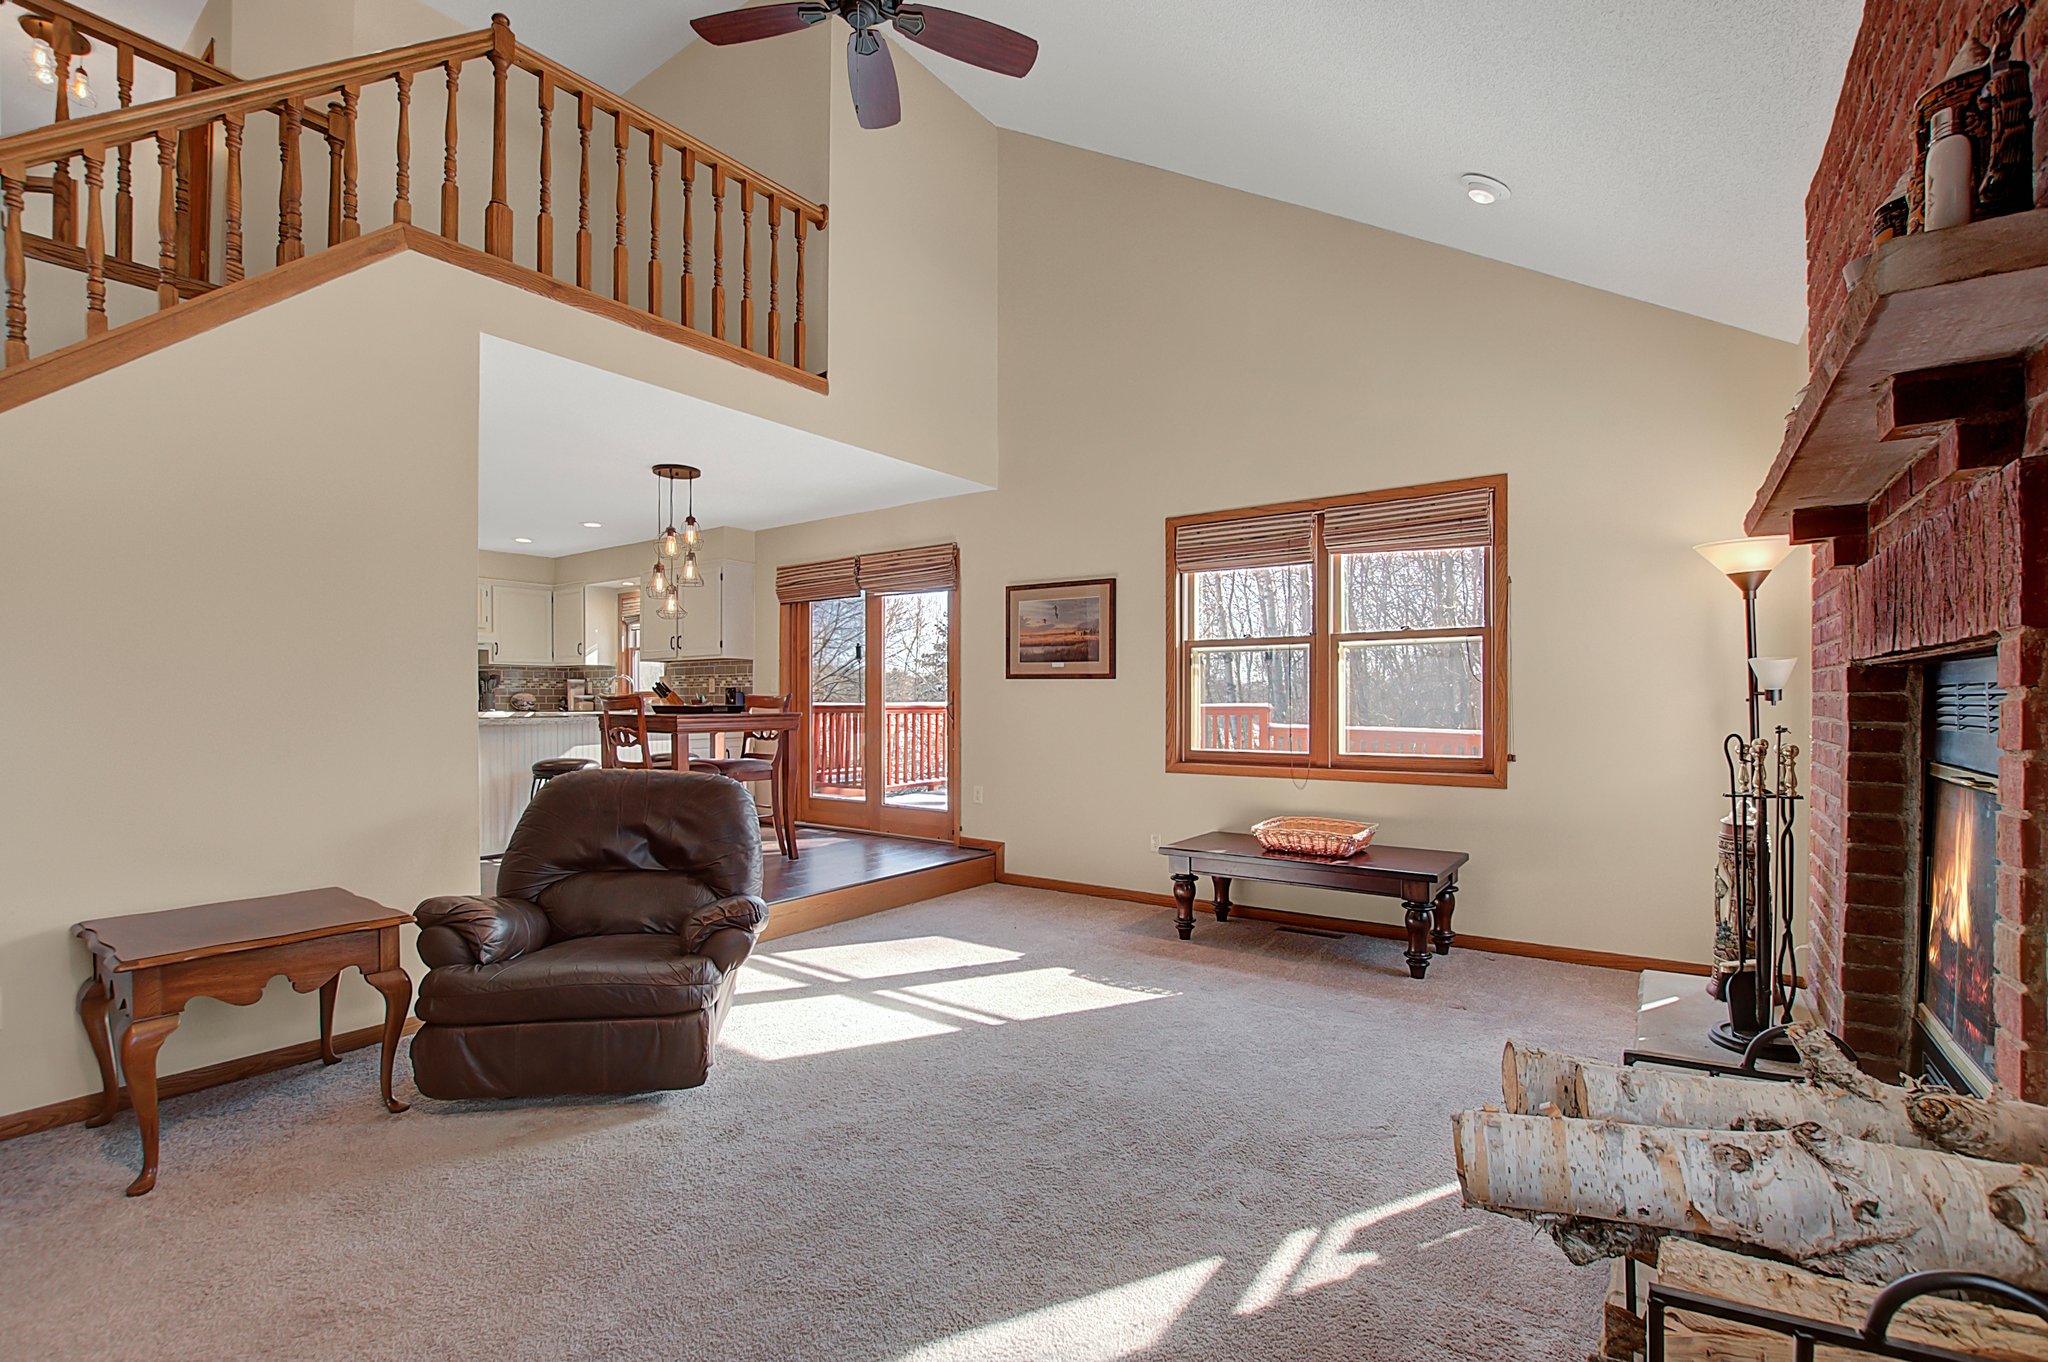 8855 202nd St N, Forest Lake, MN 55025, US Photo 14